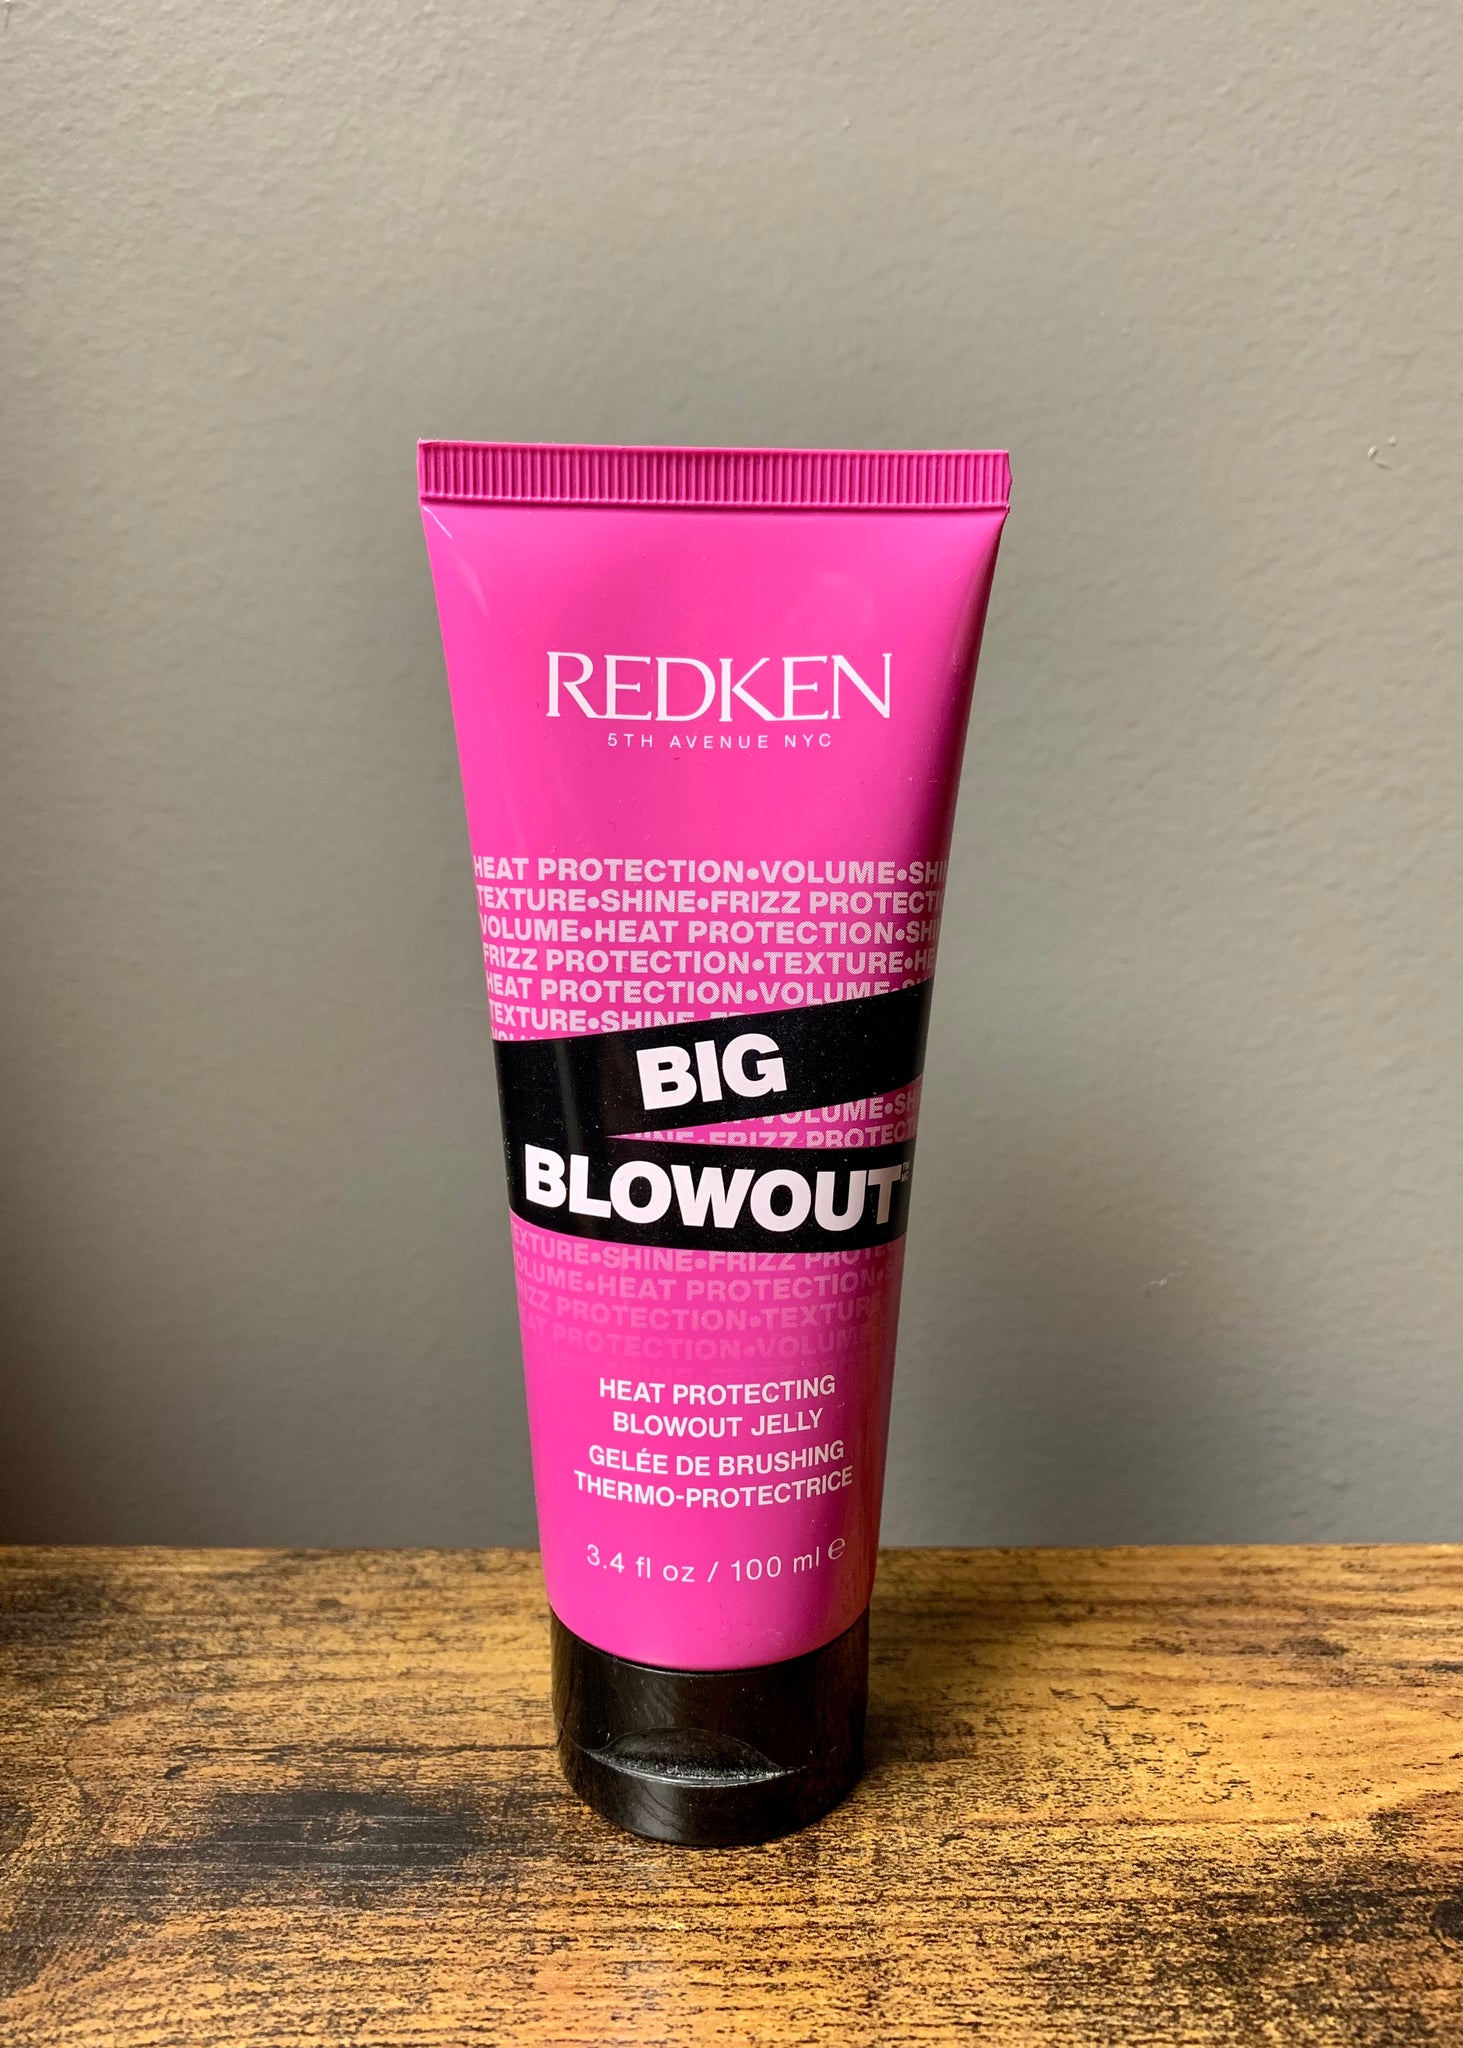 Big Blowout Hear Protecting Jelly Serum